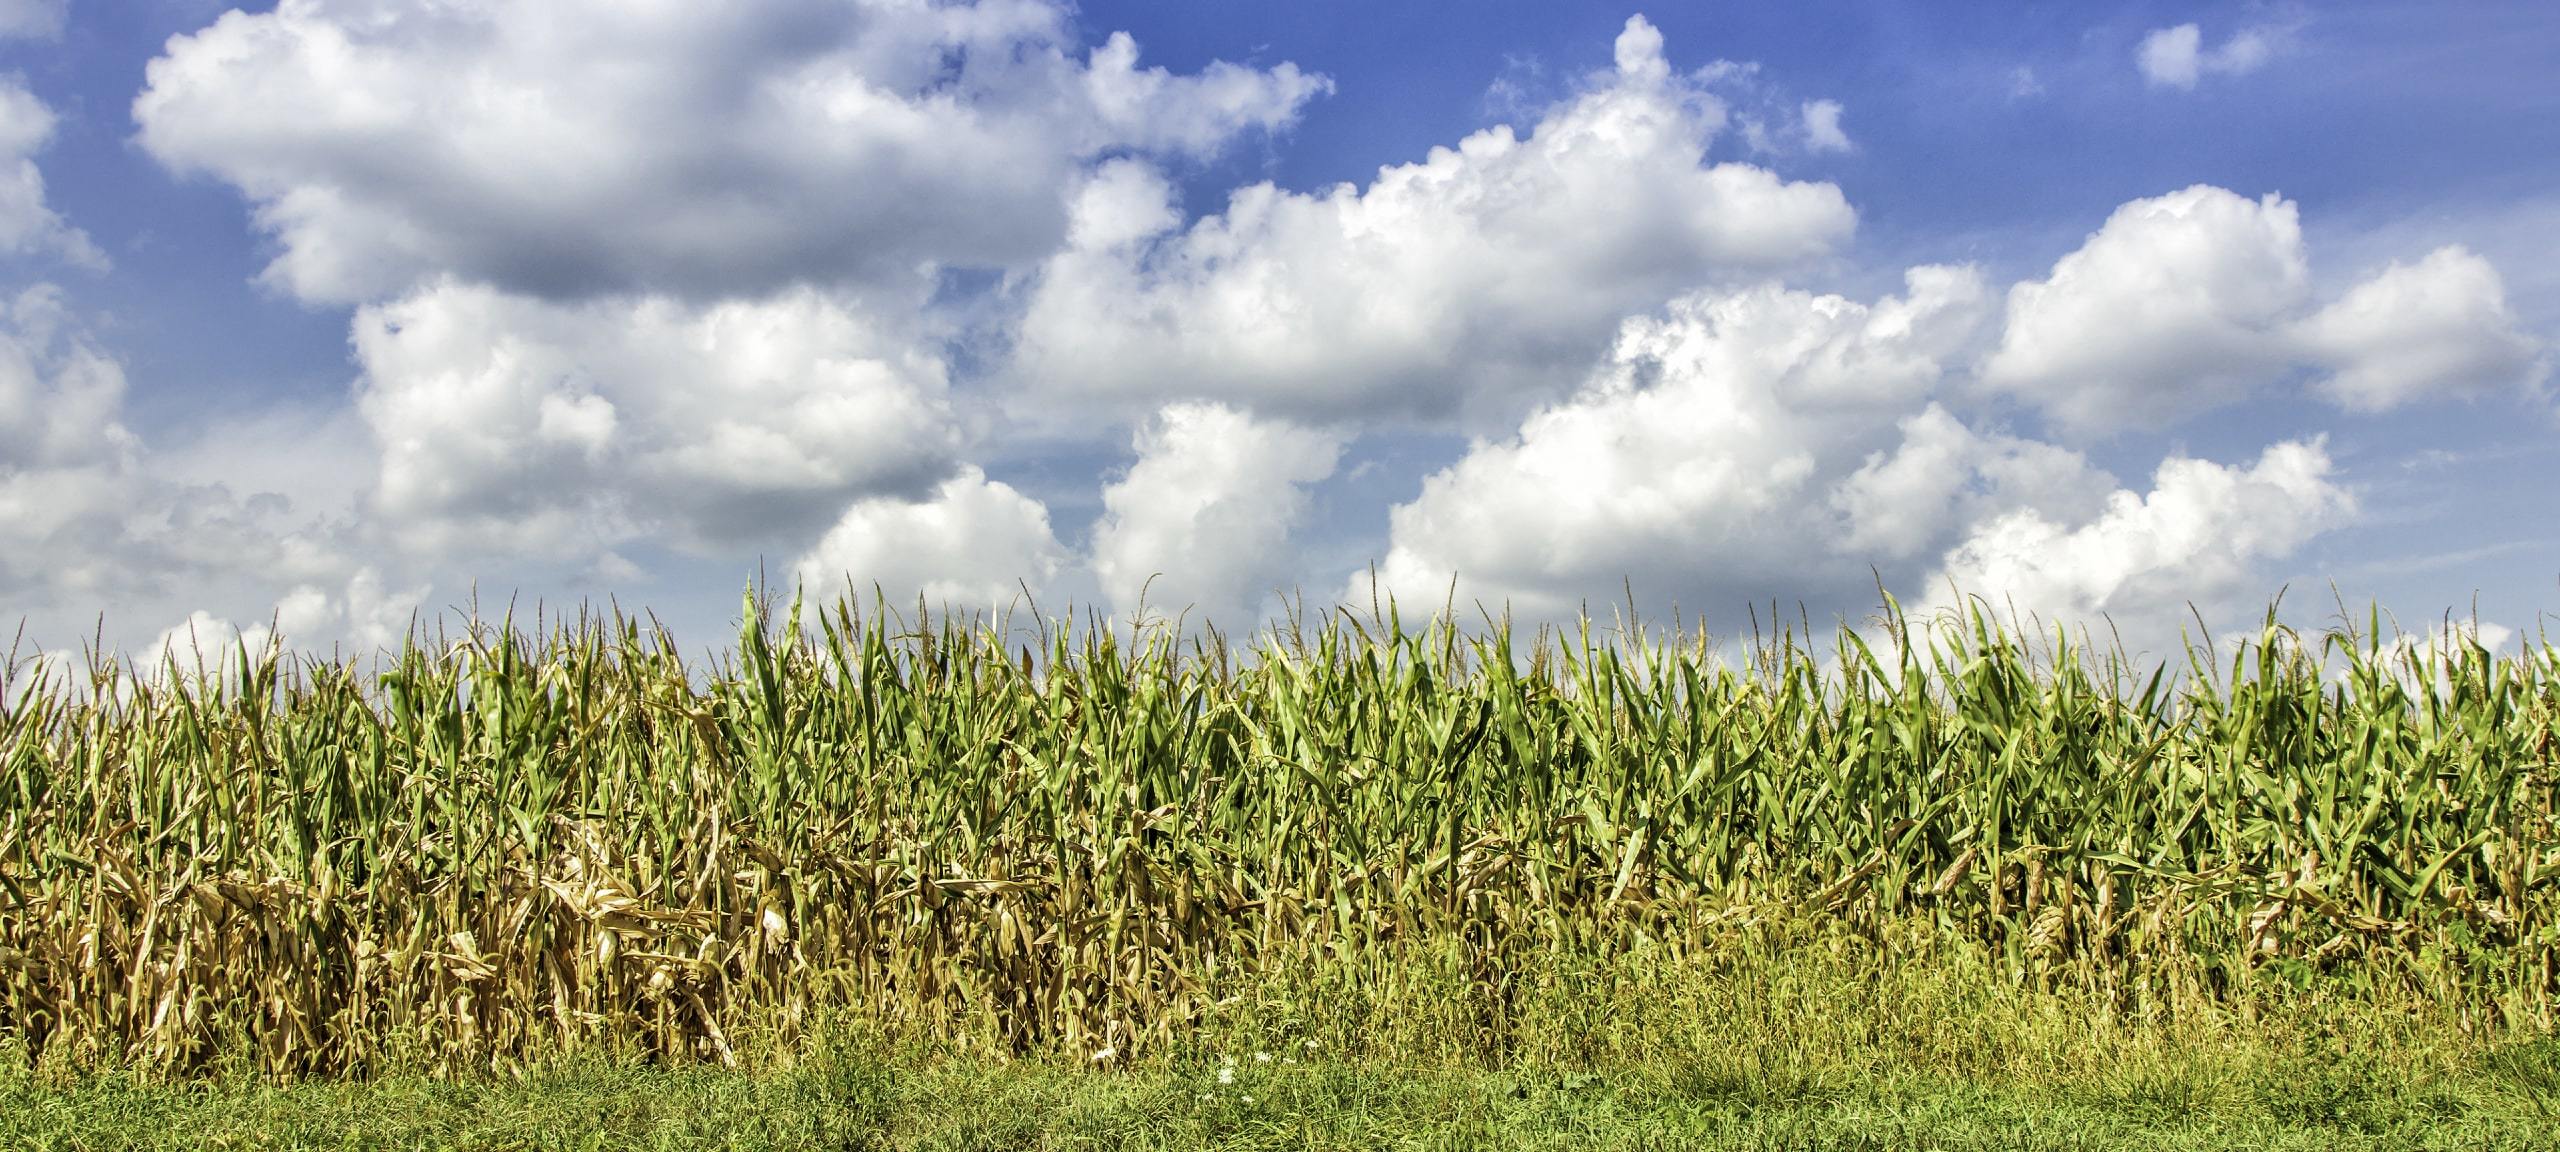 Corn fields and blue sky in Cecil County, Maryland